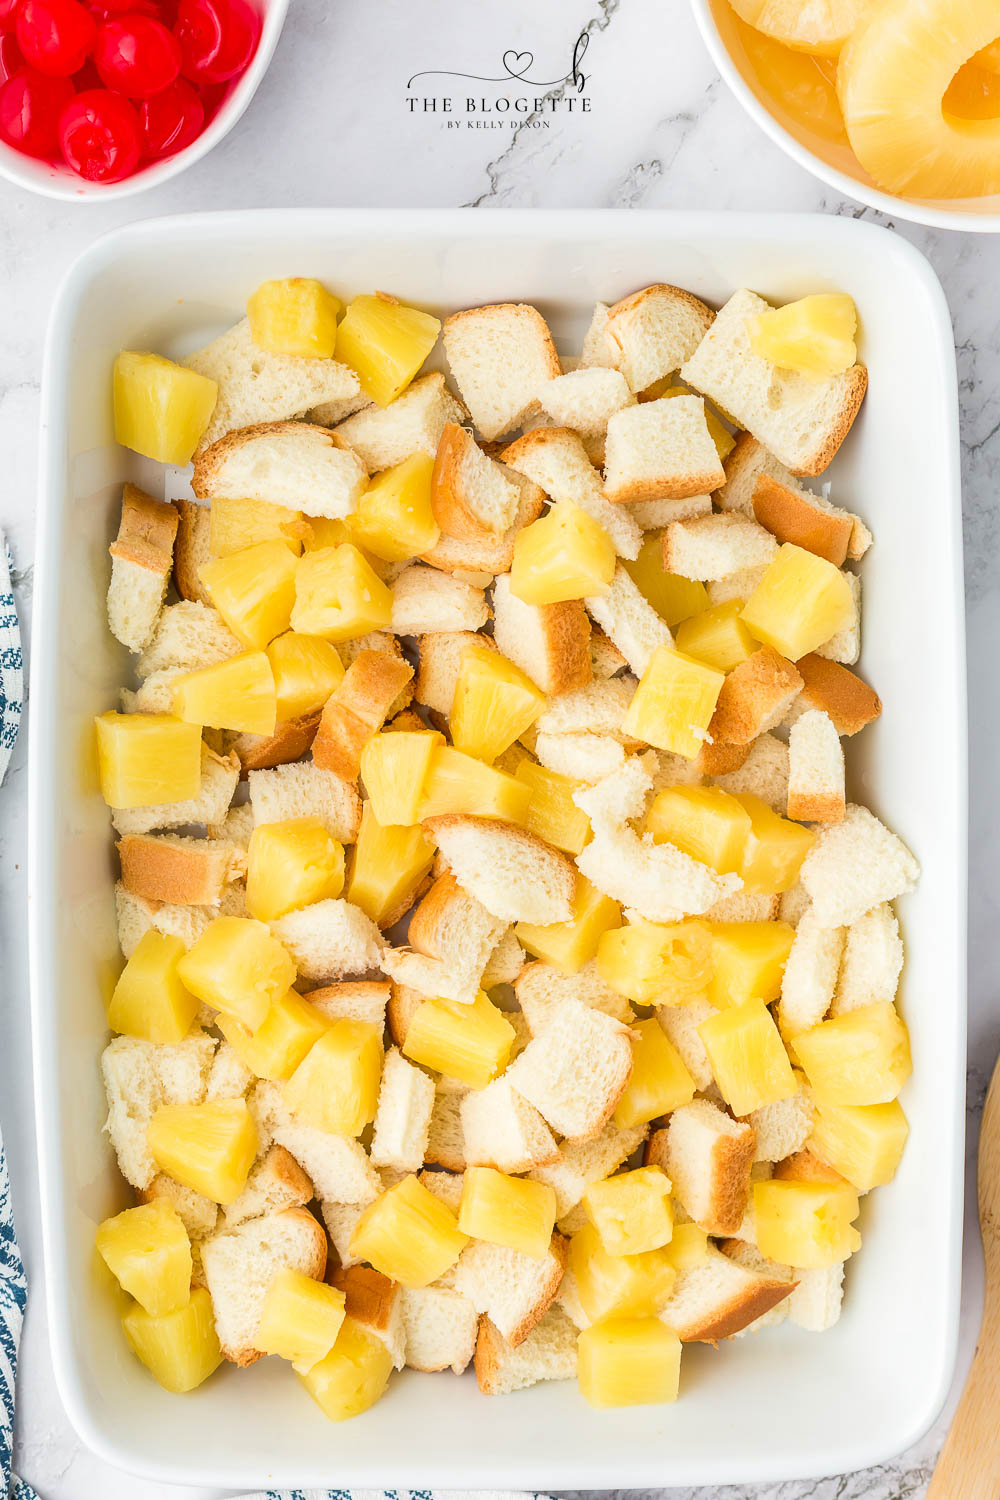 Pineapple mixture over bread in baking dish